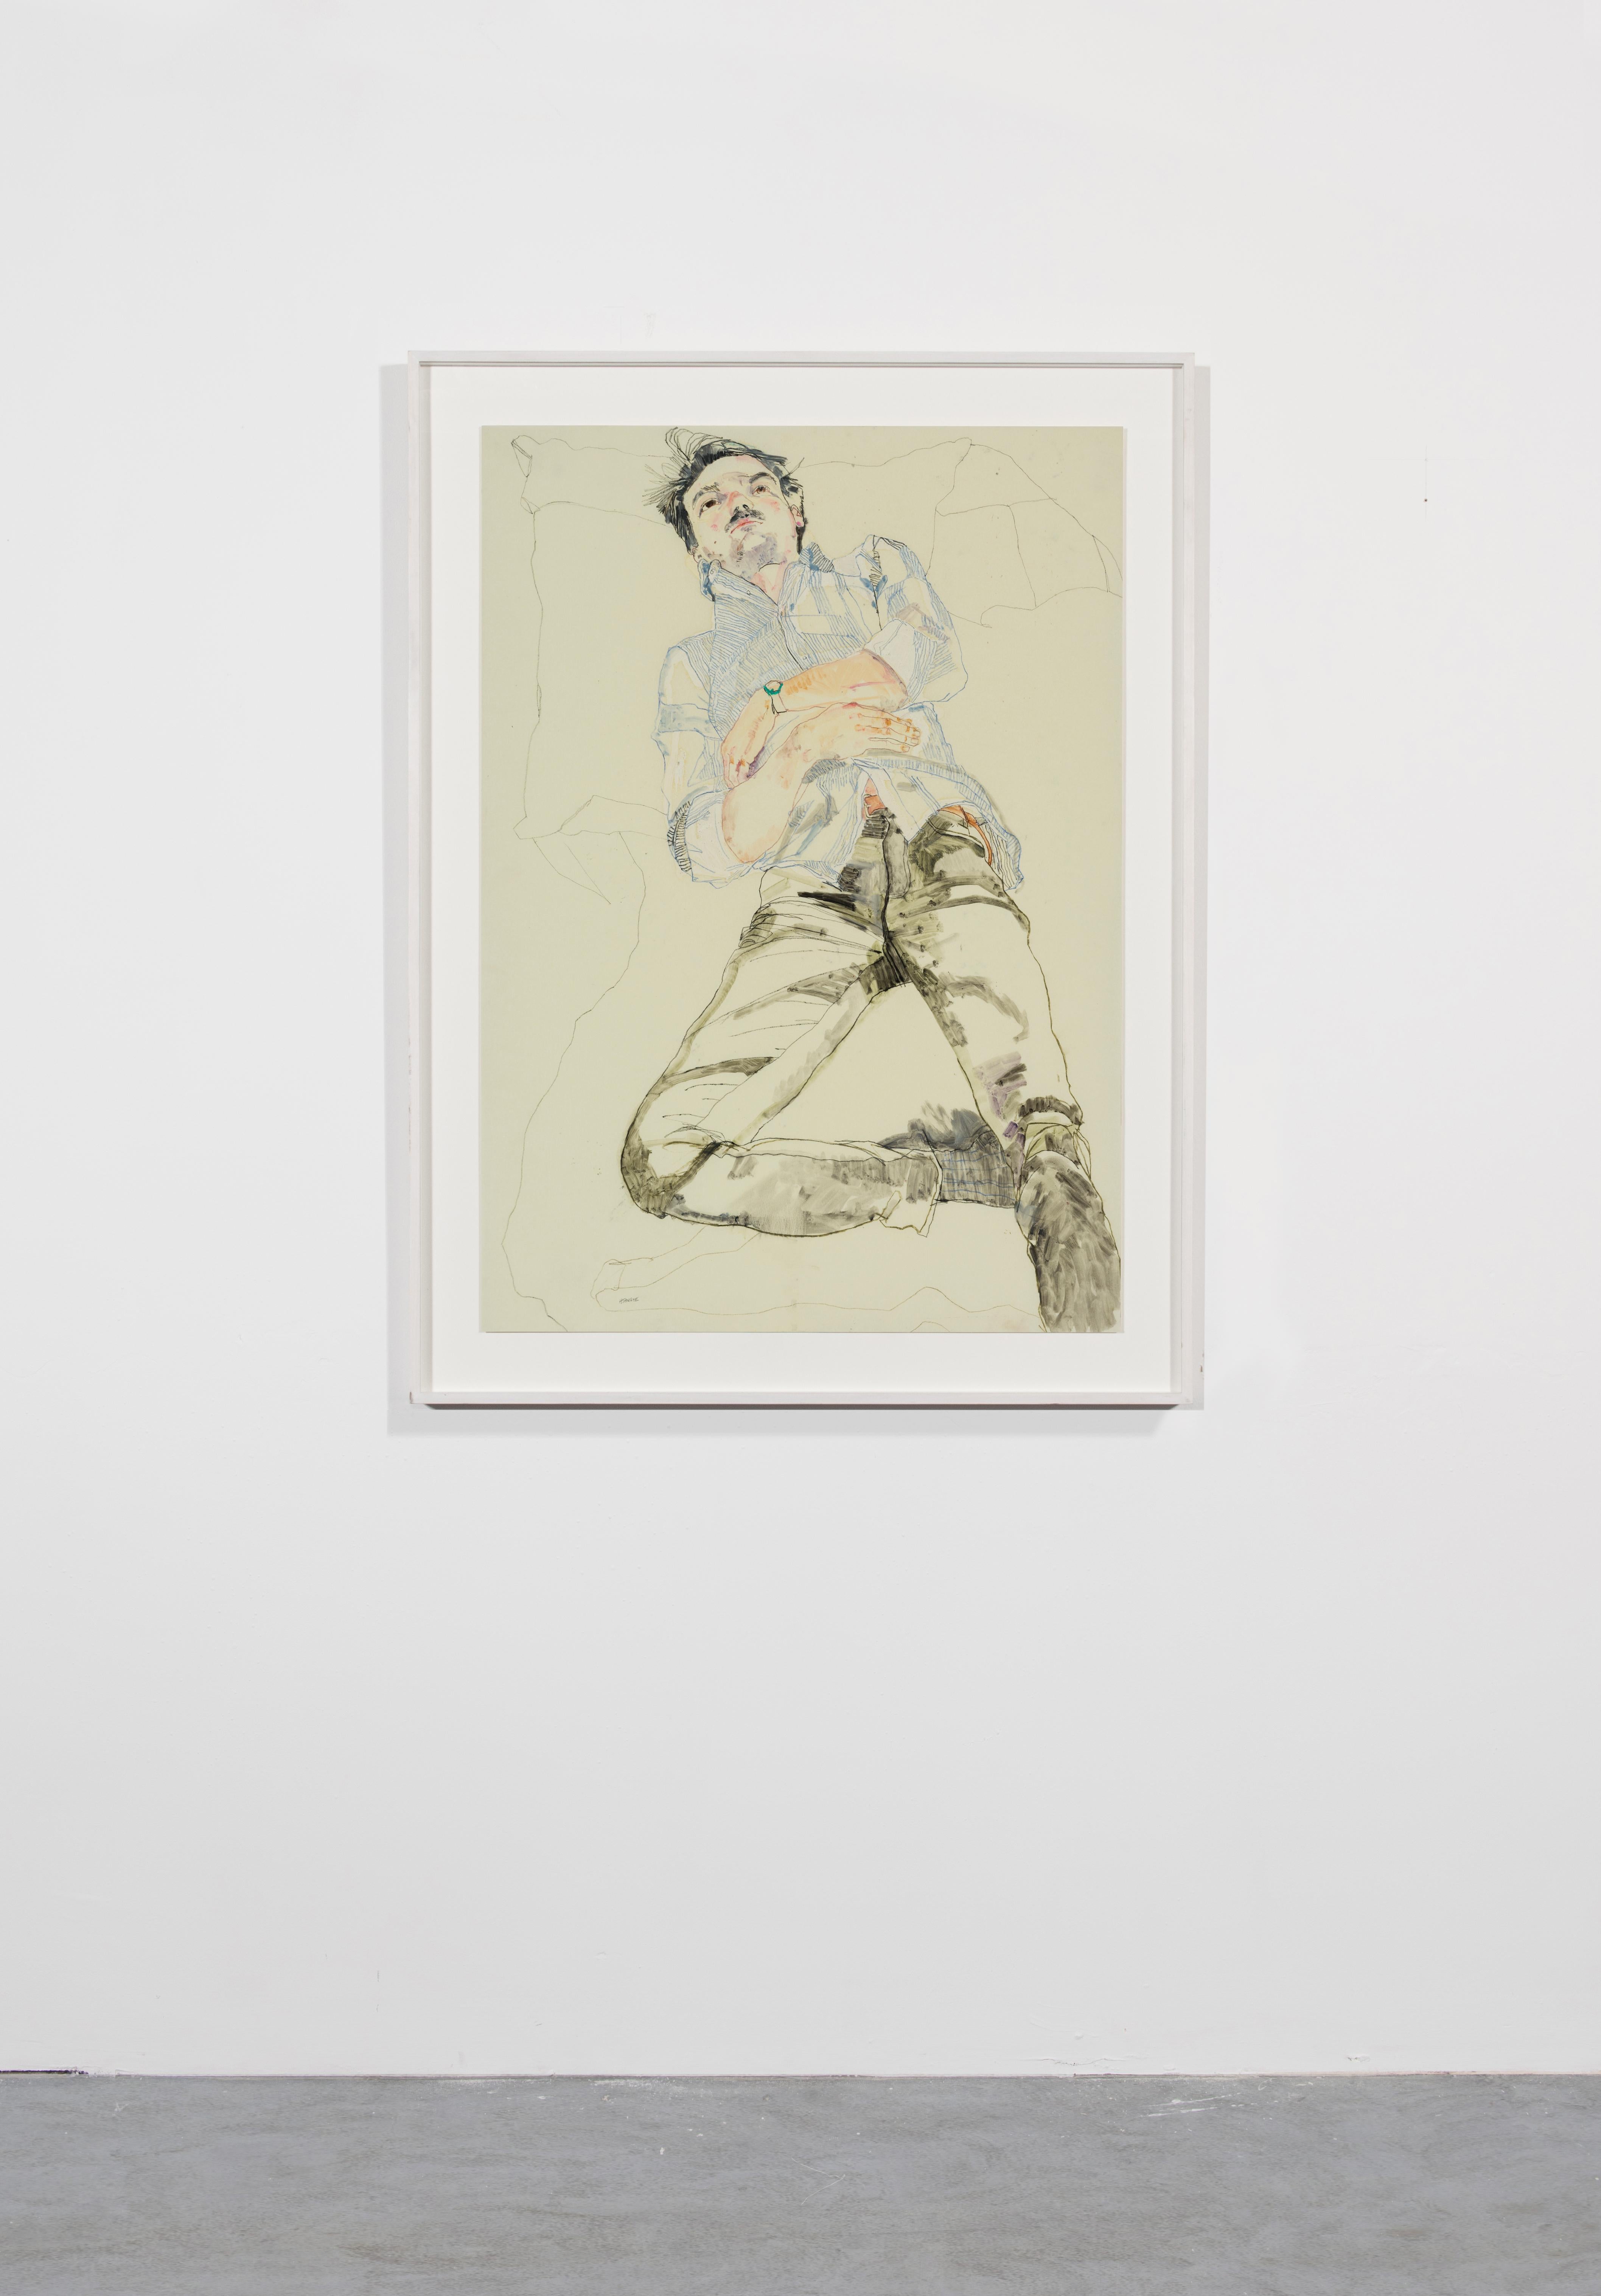 Oscar (Lying Back - Blue Stripe Shirt), Mixed media on Pergamenata parchment - Contemporary Painting by Howard Tangye